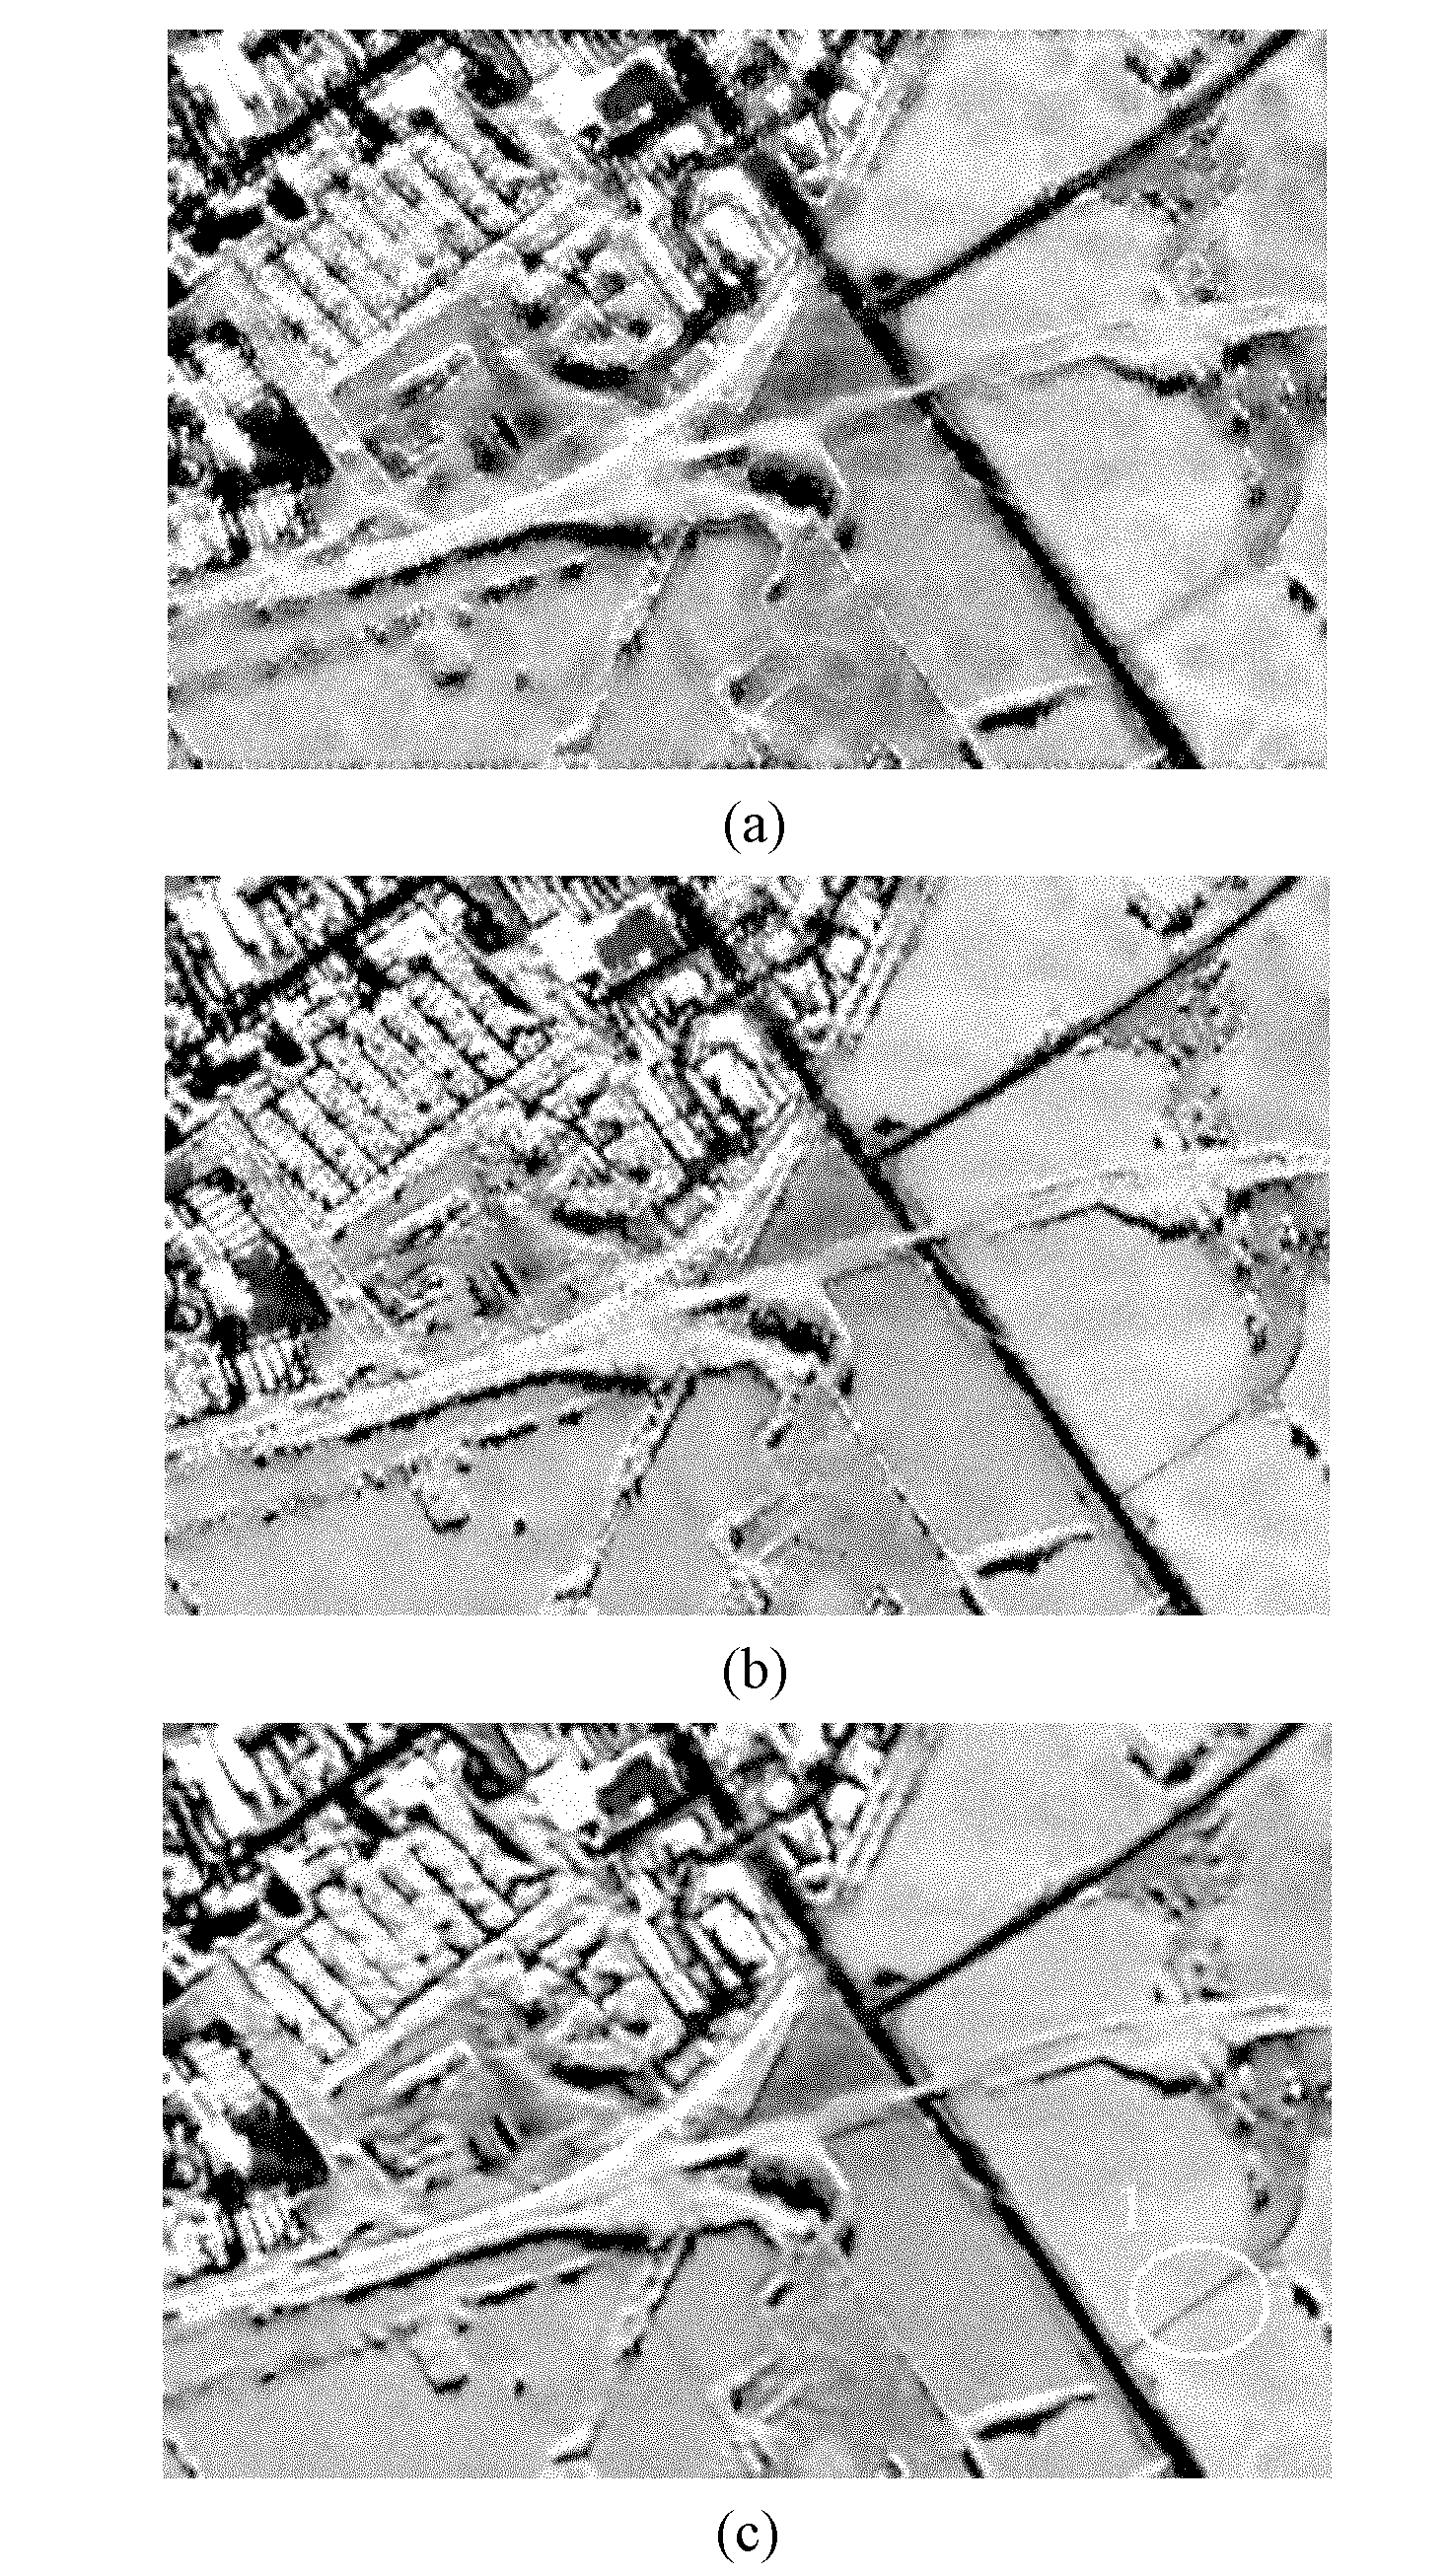 Speckle suppression method for polarized SAR (Synthetic Aperture Radar) data based on non-local mean value fused with PCA (Polar Cap Absorption)